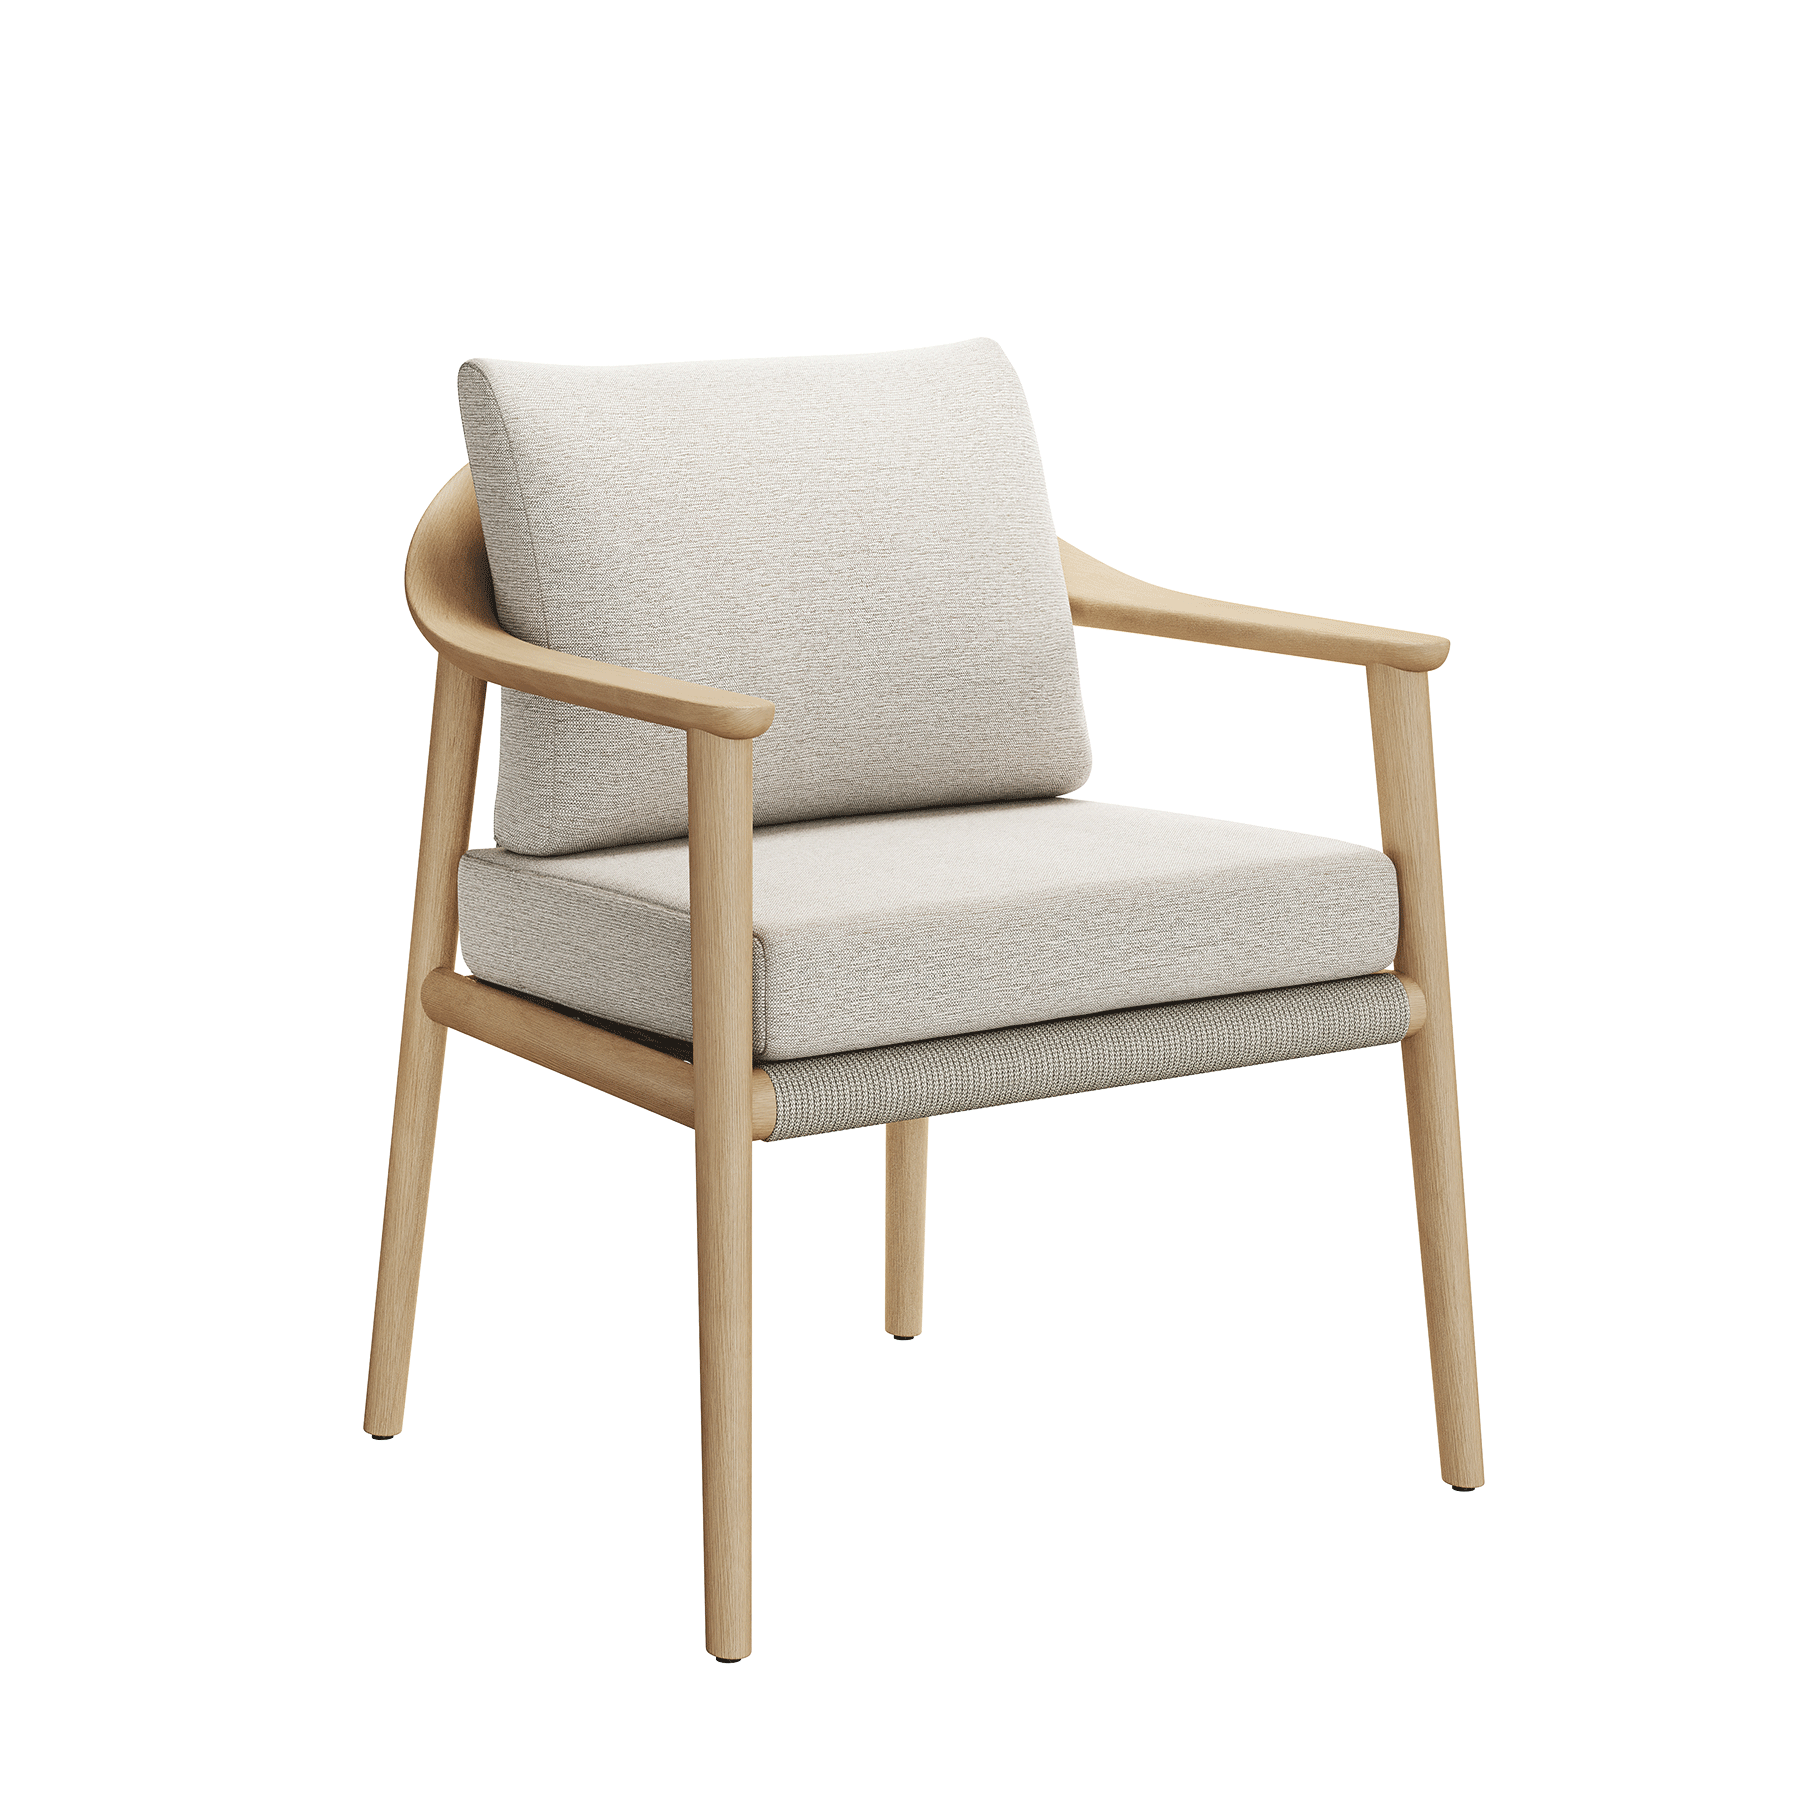 N1 luxury light teak outdoor furniture with mid century inspired rope detail garden dining chair